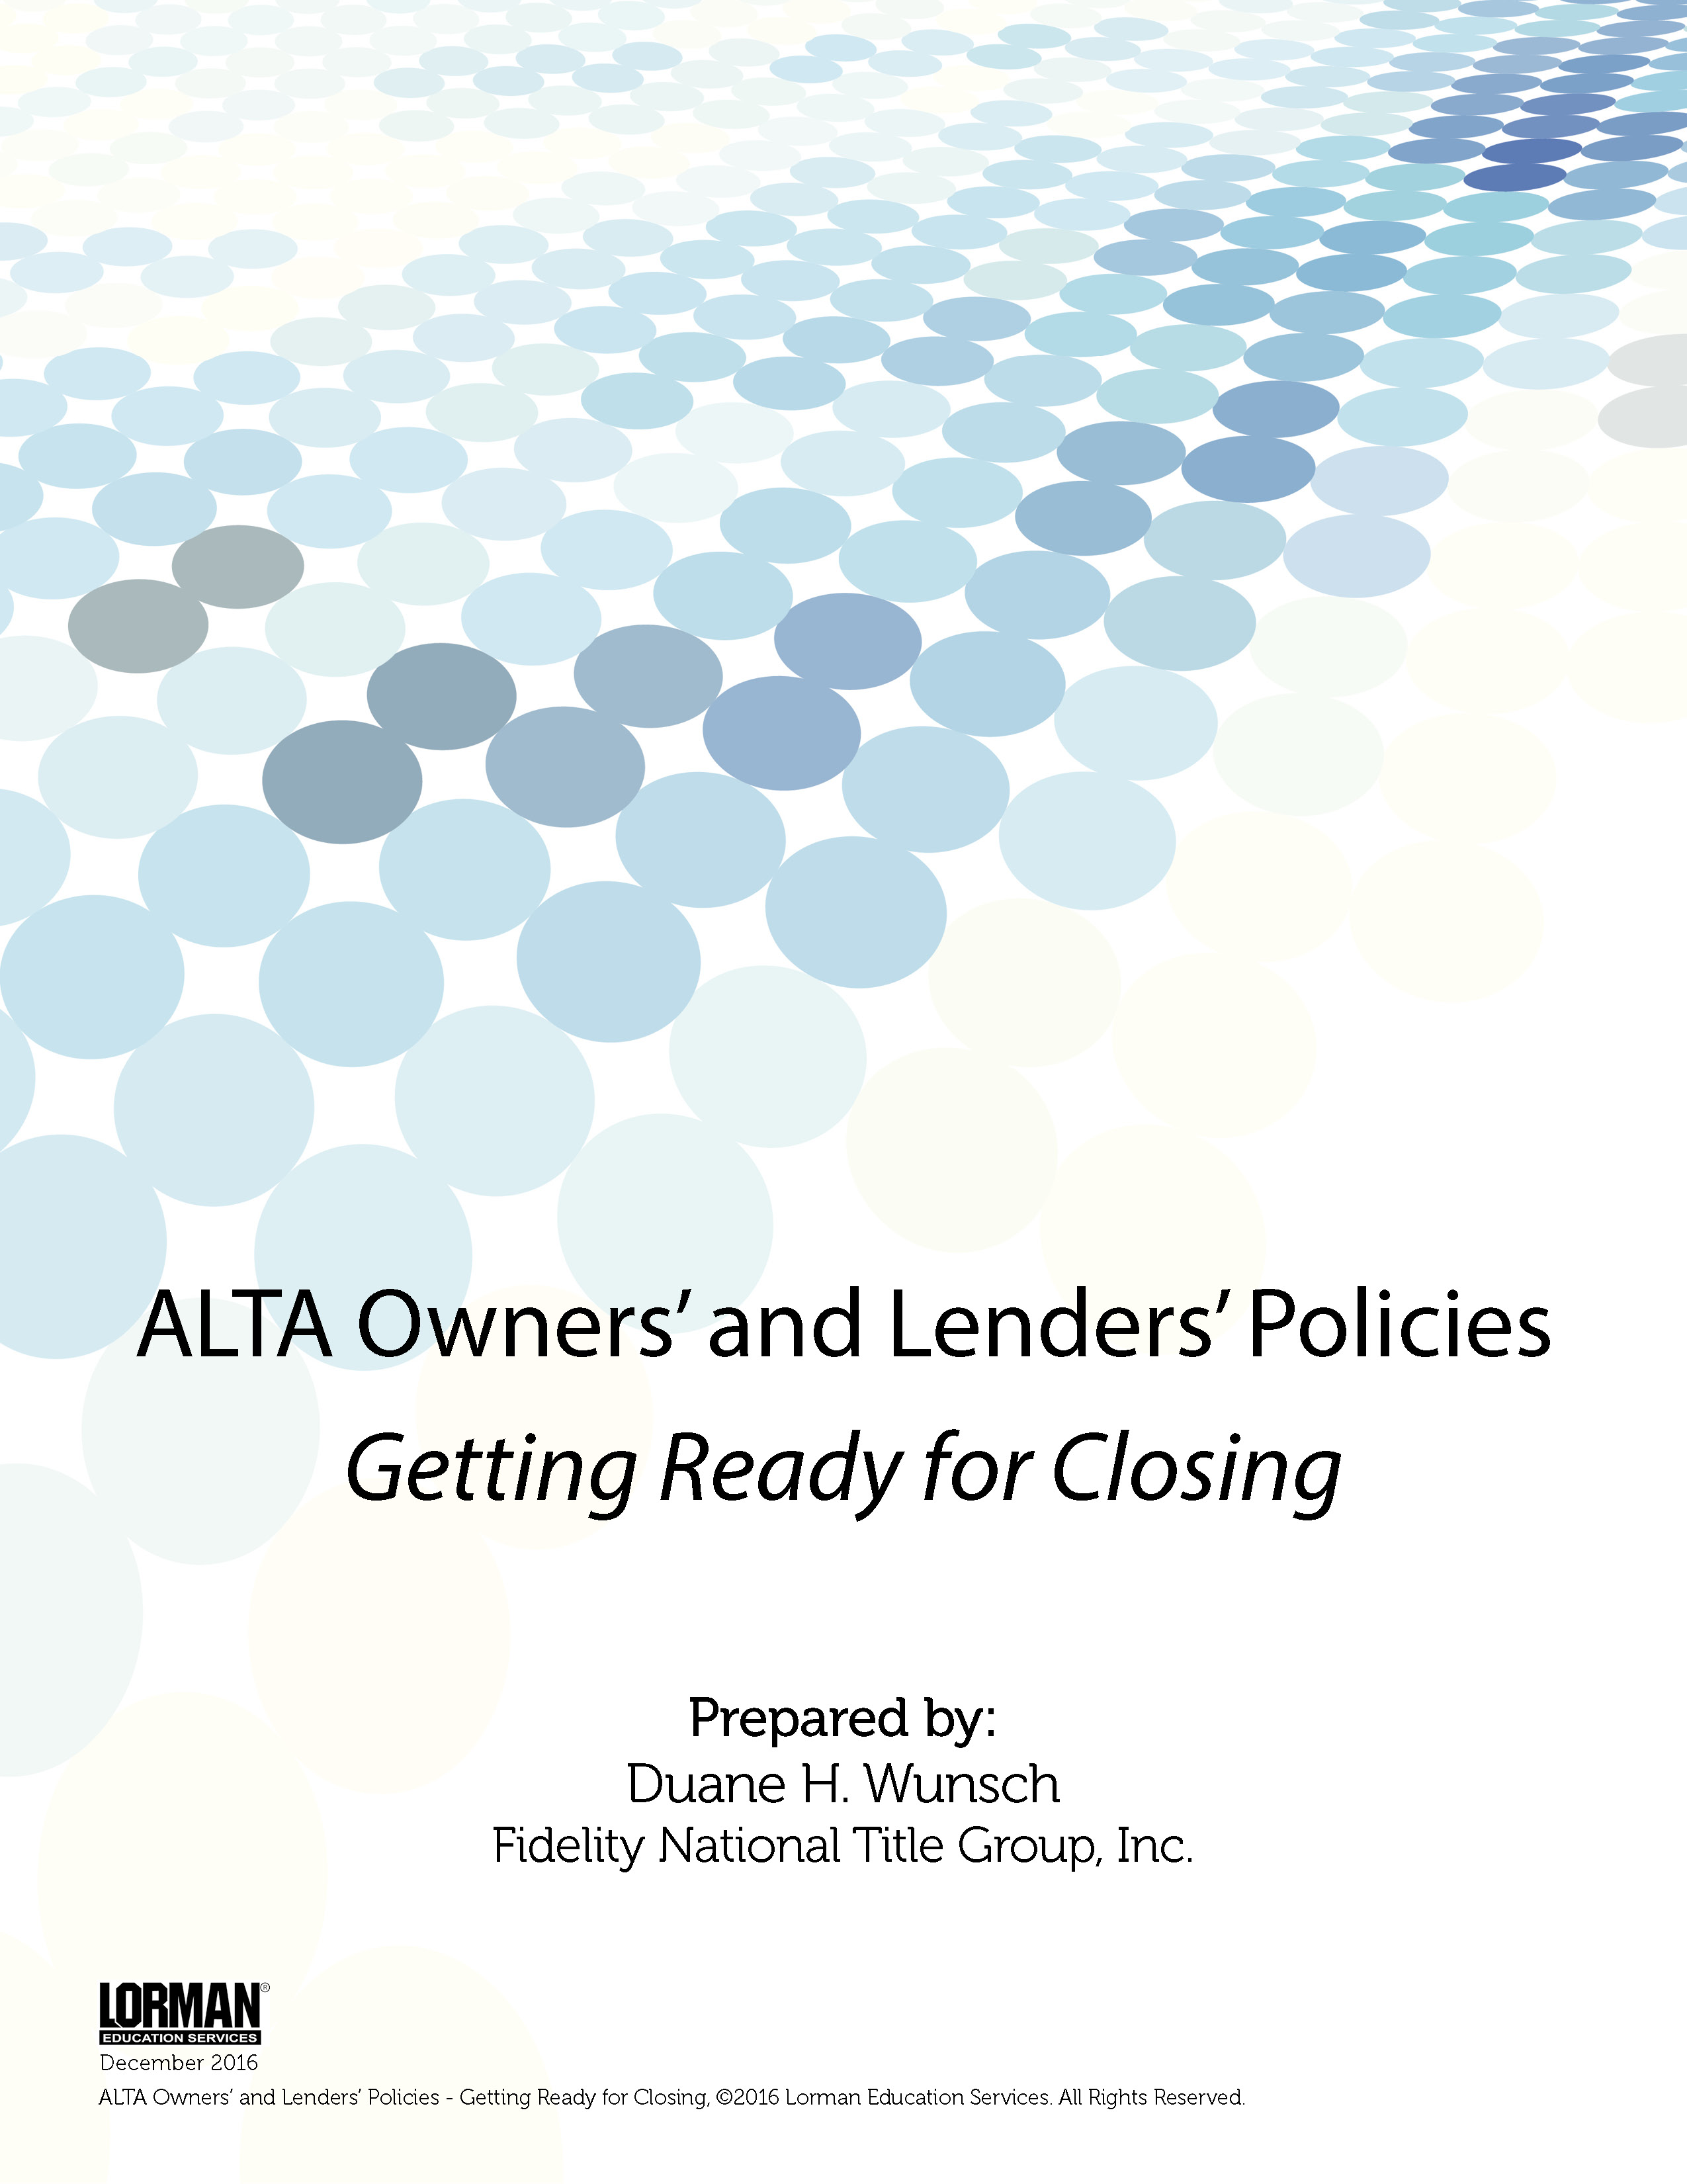 ALTA Owners' and Lenders' Policies - Getting Ready for Closing